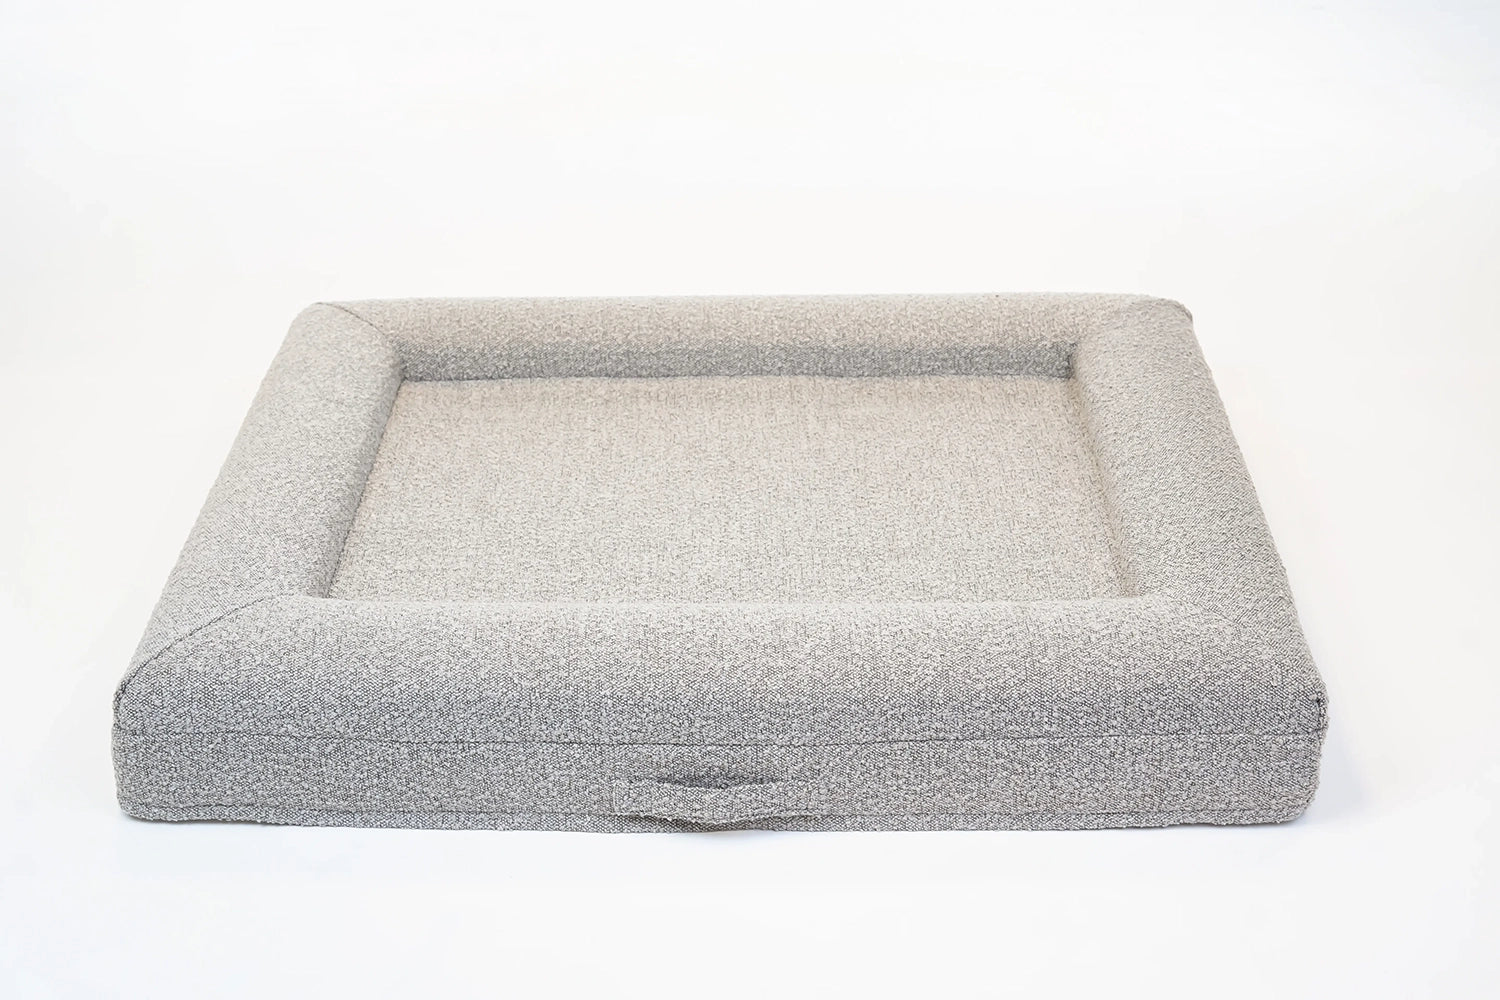 Back of a large, sand-colored orthopedic memory foam boucle dog bed with bolsters and a handle for easy transport.